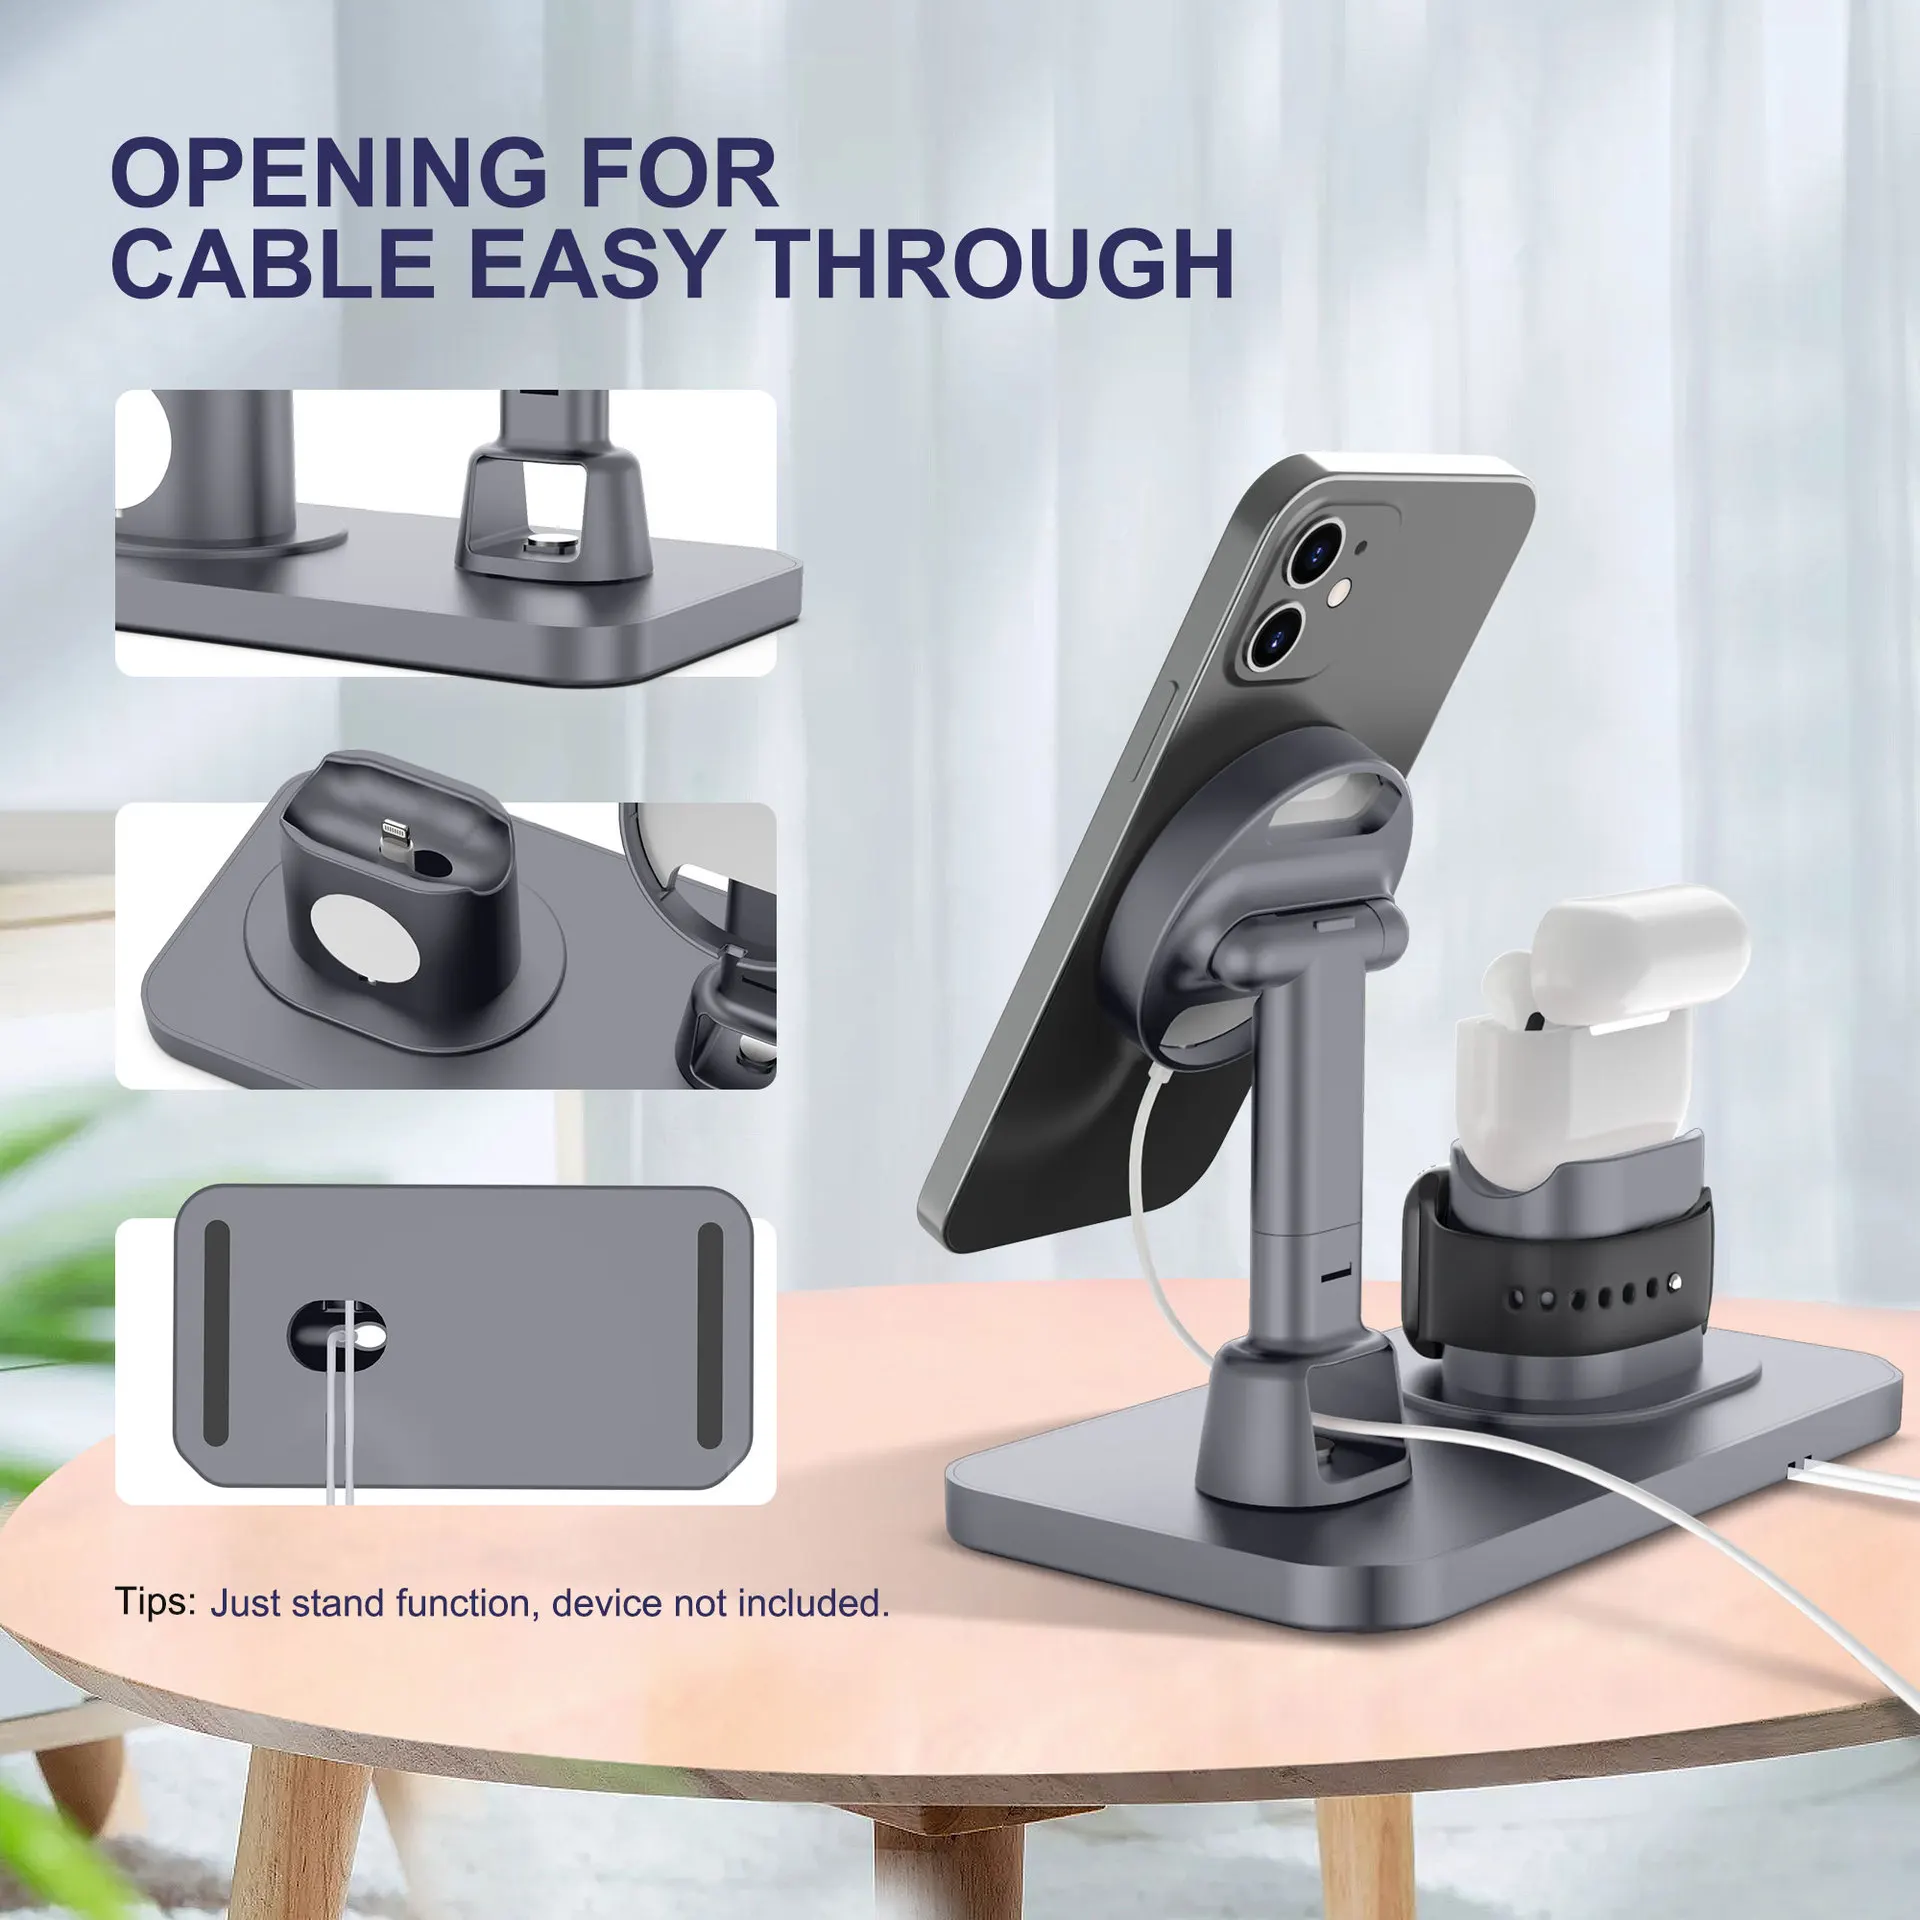 3 in 1 phone holder for iphone 12 mini pro max desk phone stand charging dock station for apple watch 6 5 4 airpods por free global shipping